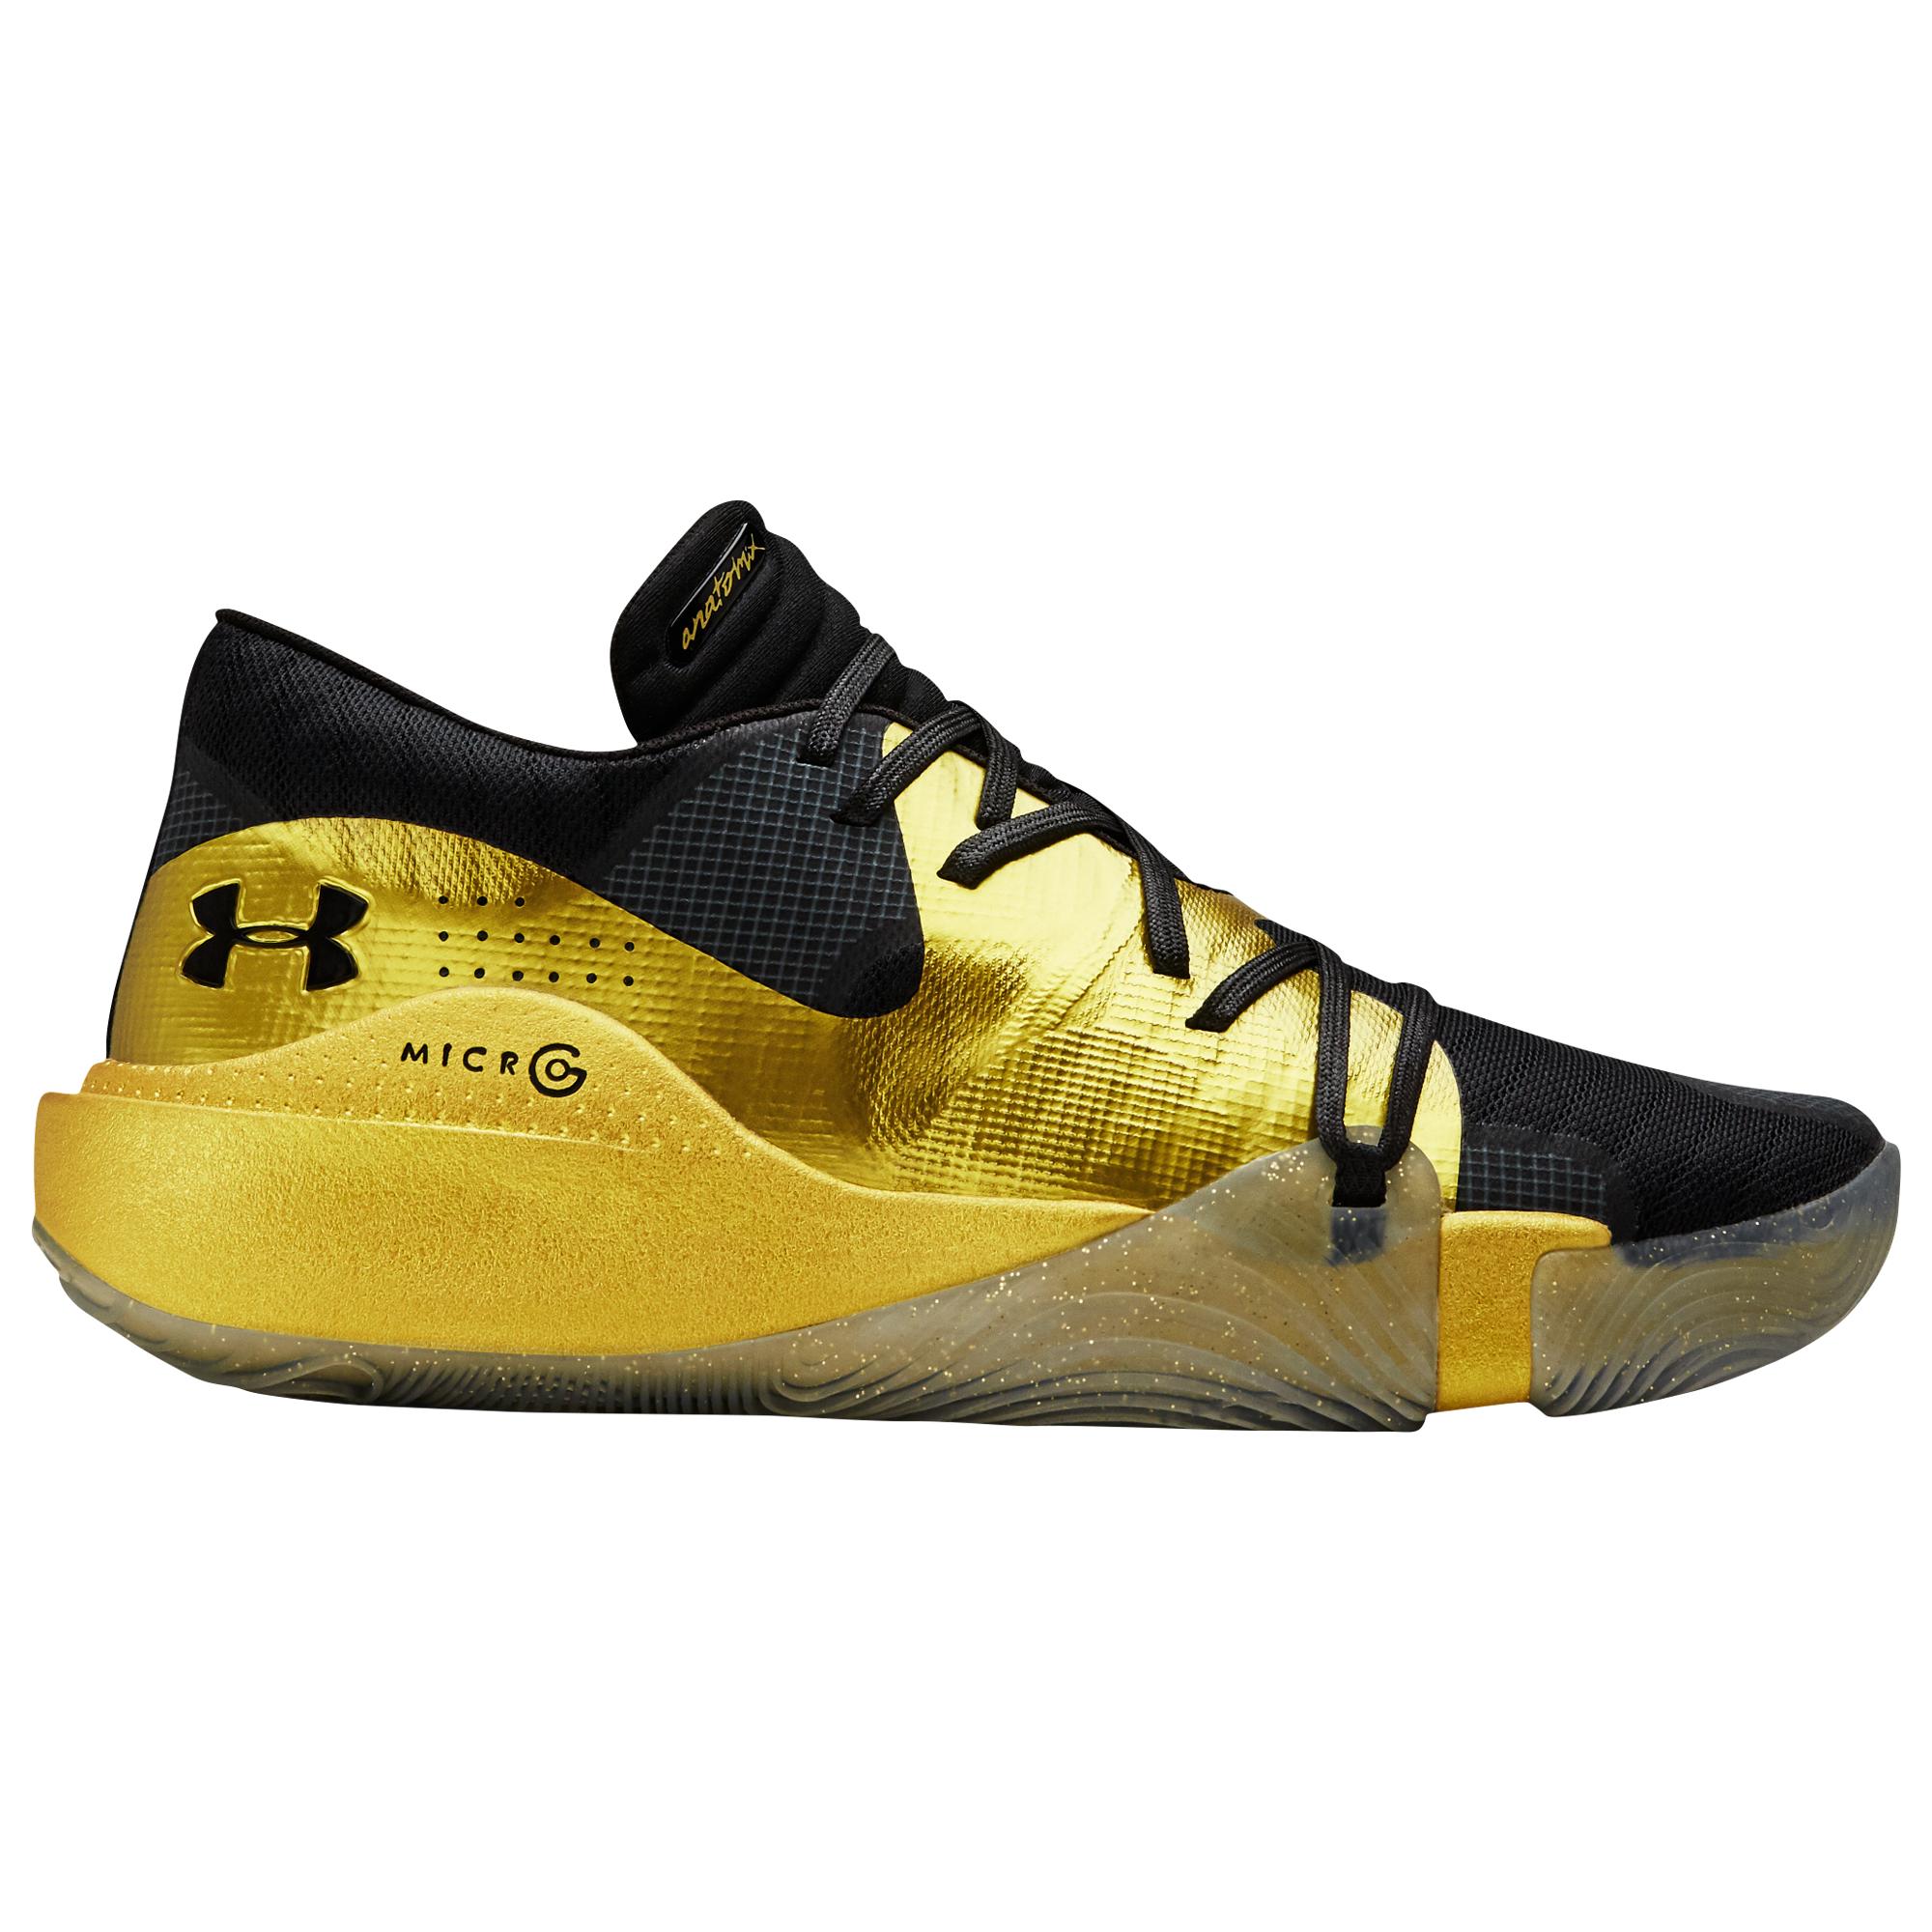 gold under armour shoes